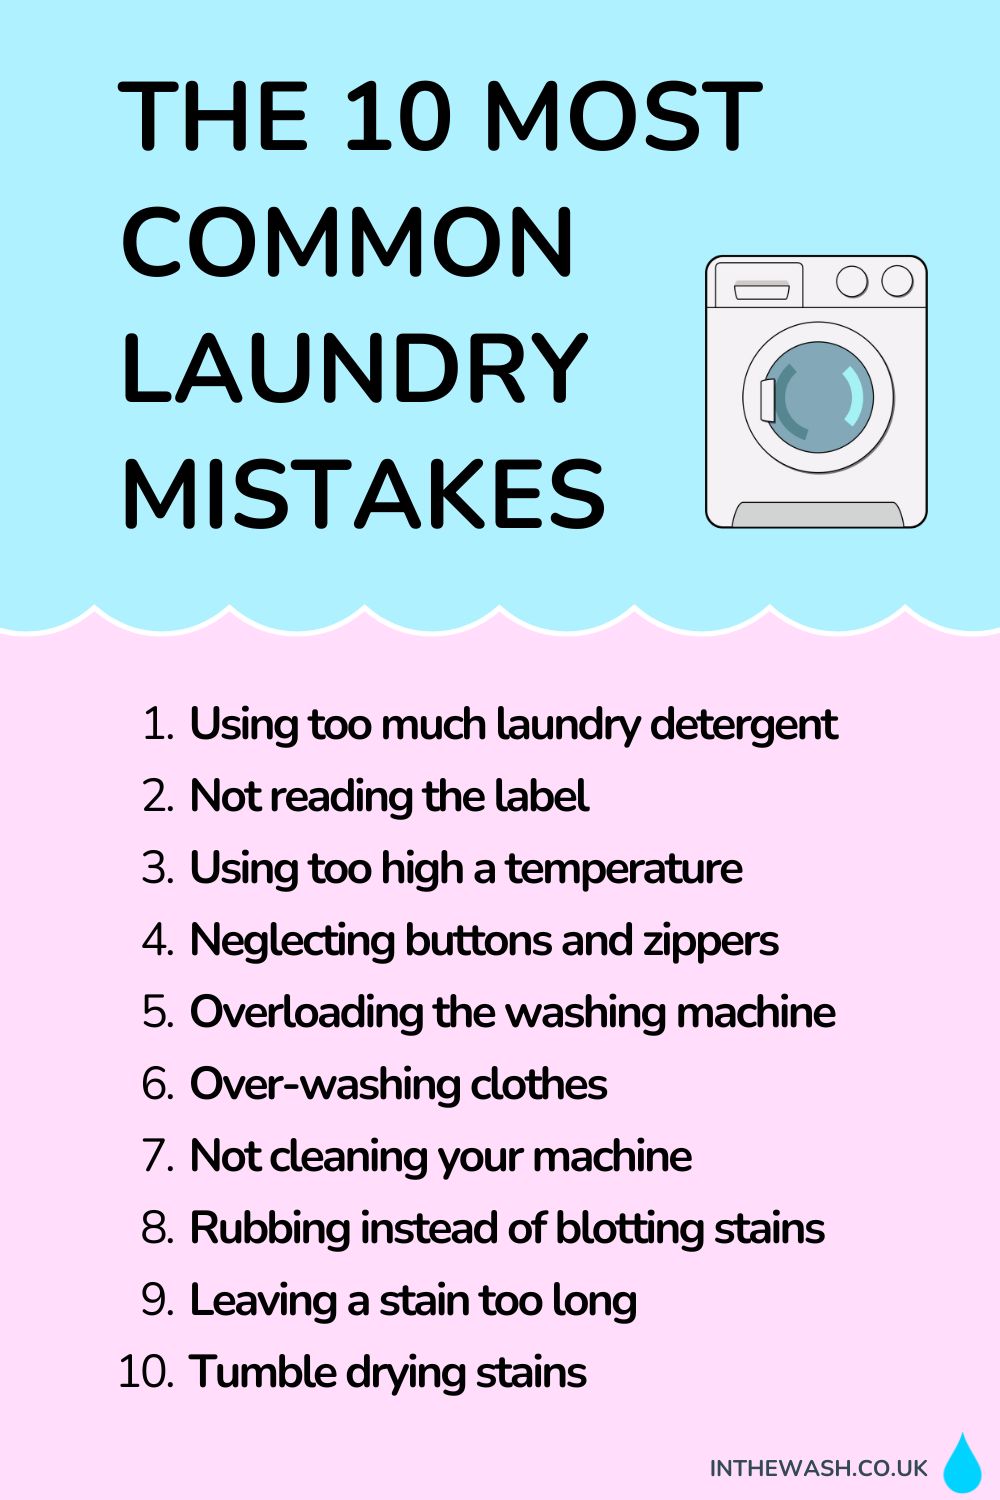 The 10 Most Common Laundry Mistakes